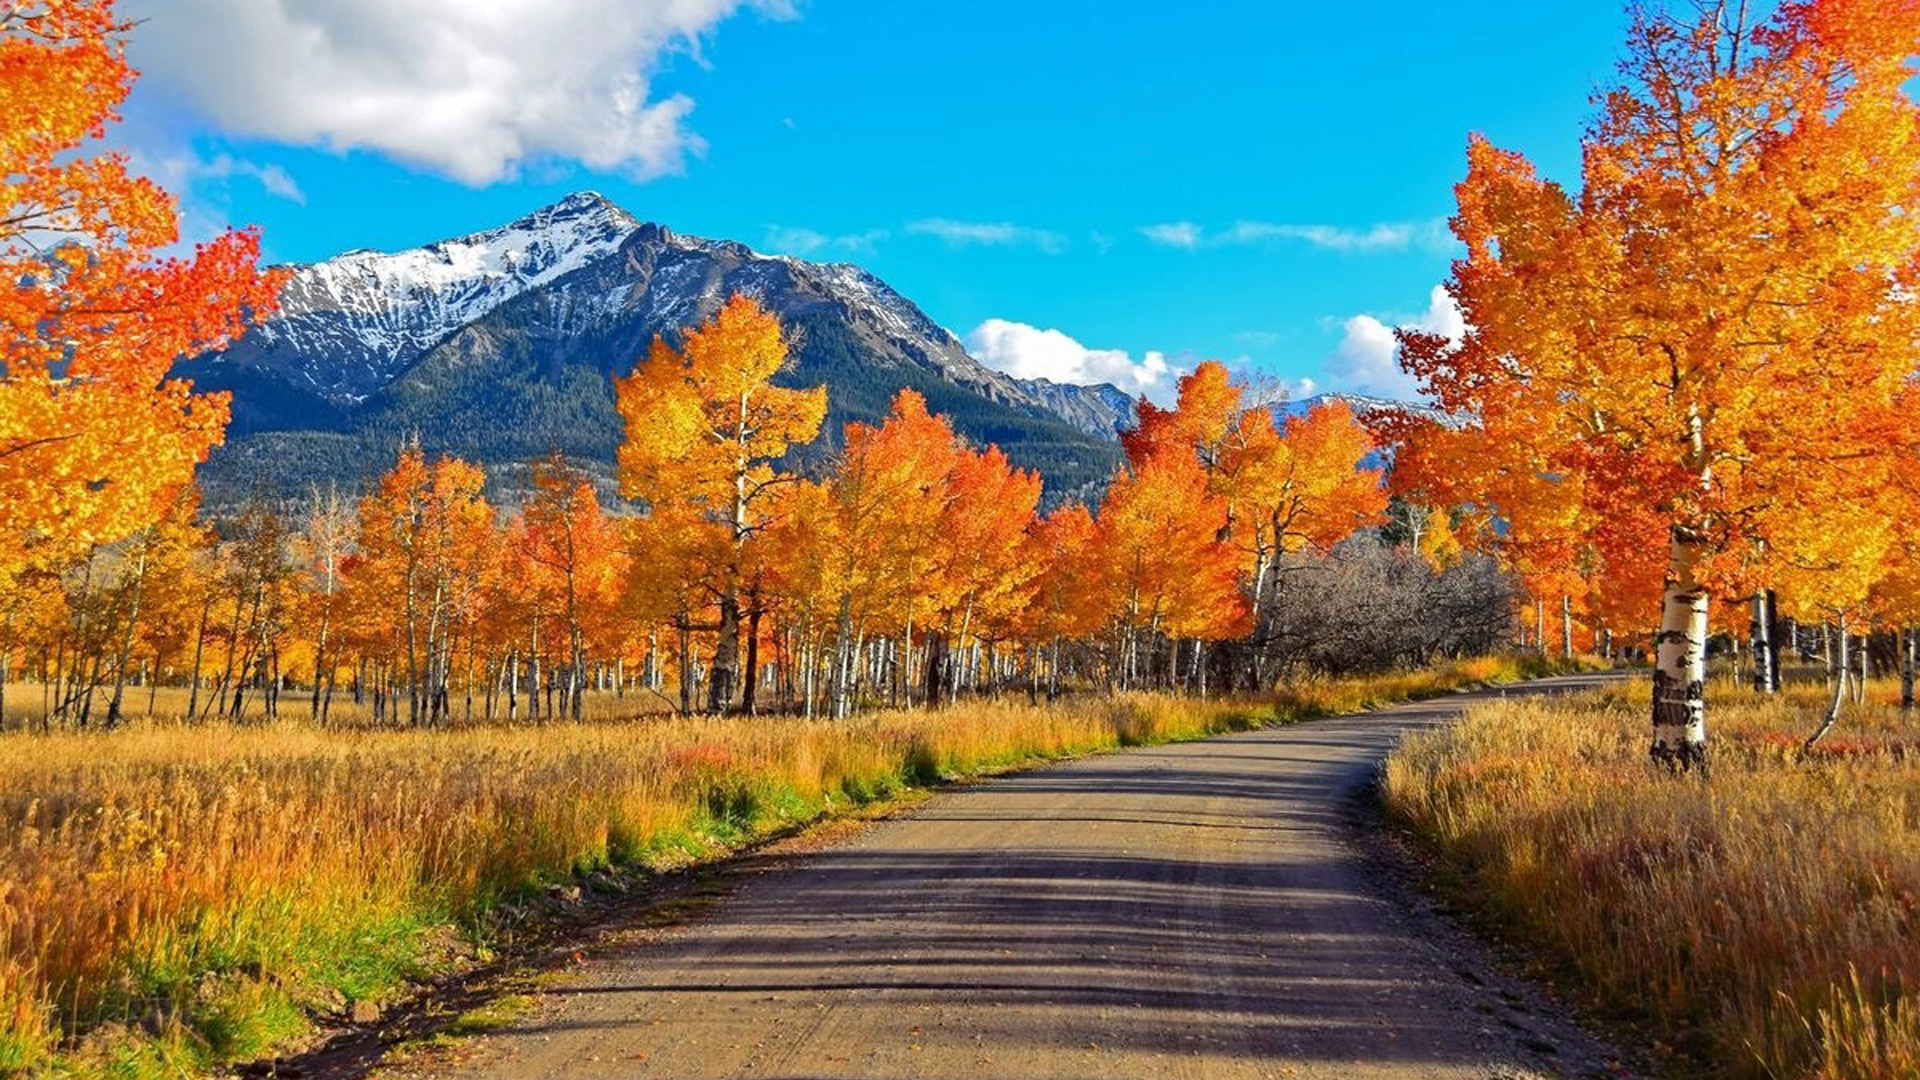 Road Between Yellow Orange Autumn Trees And Landscape Of White Covered Mountain Under White Blue Sky HD Nature